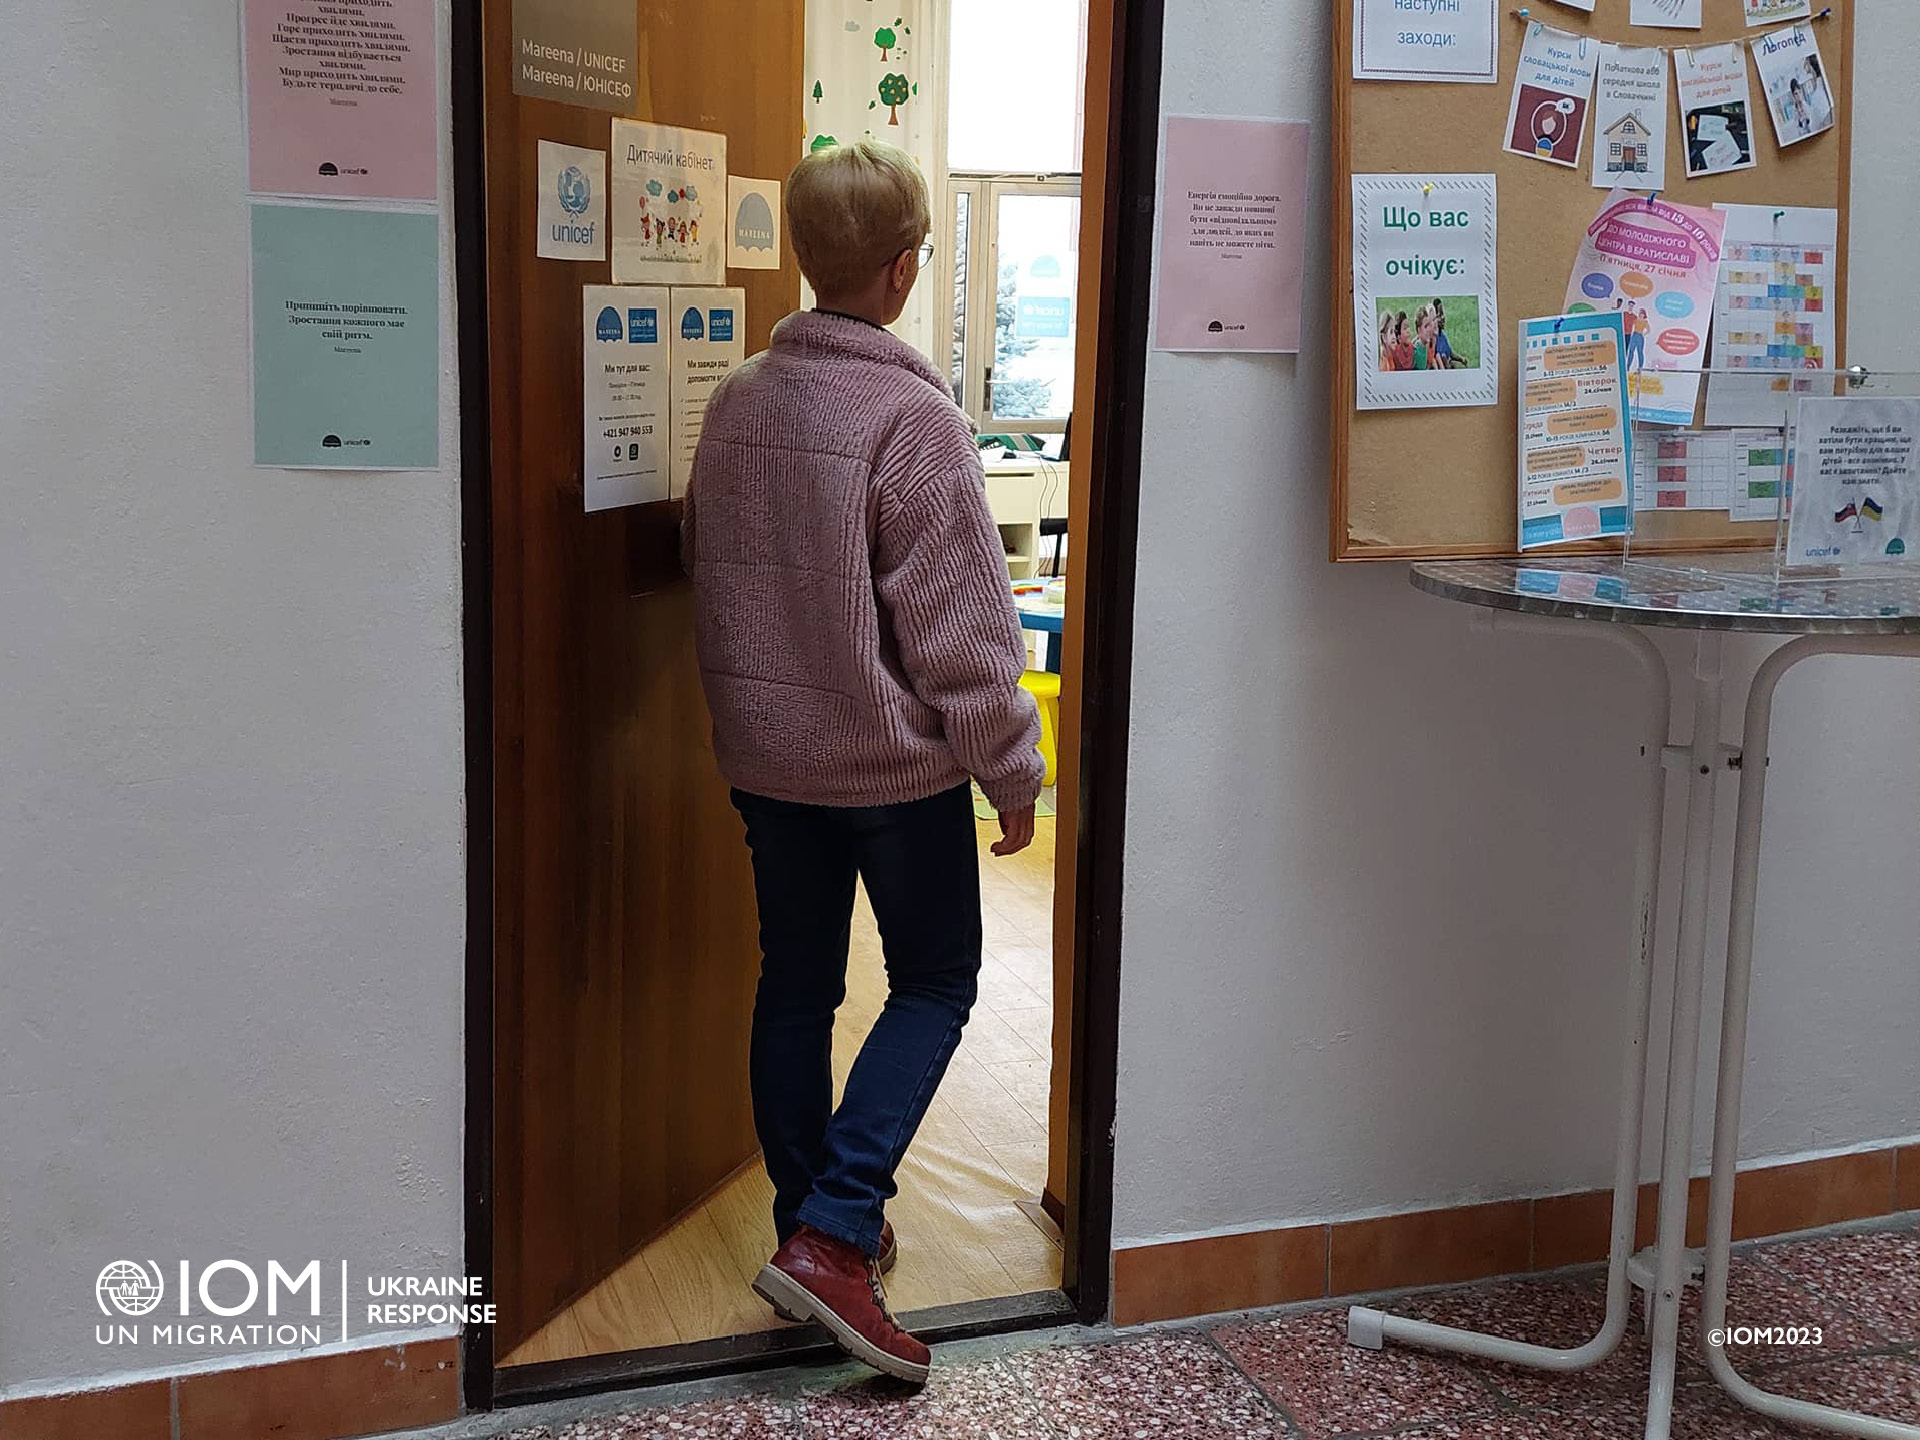 Yulia’s stay in Slovakia is approaching the one-year mark. For now, she is not able to think about the future and lives for the moment. Photo IOM 2023/Júlia Kováčová 